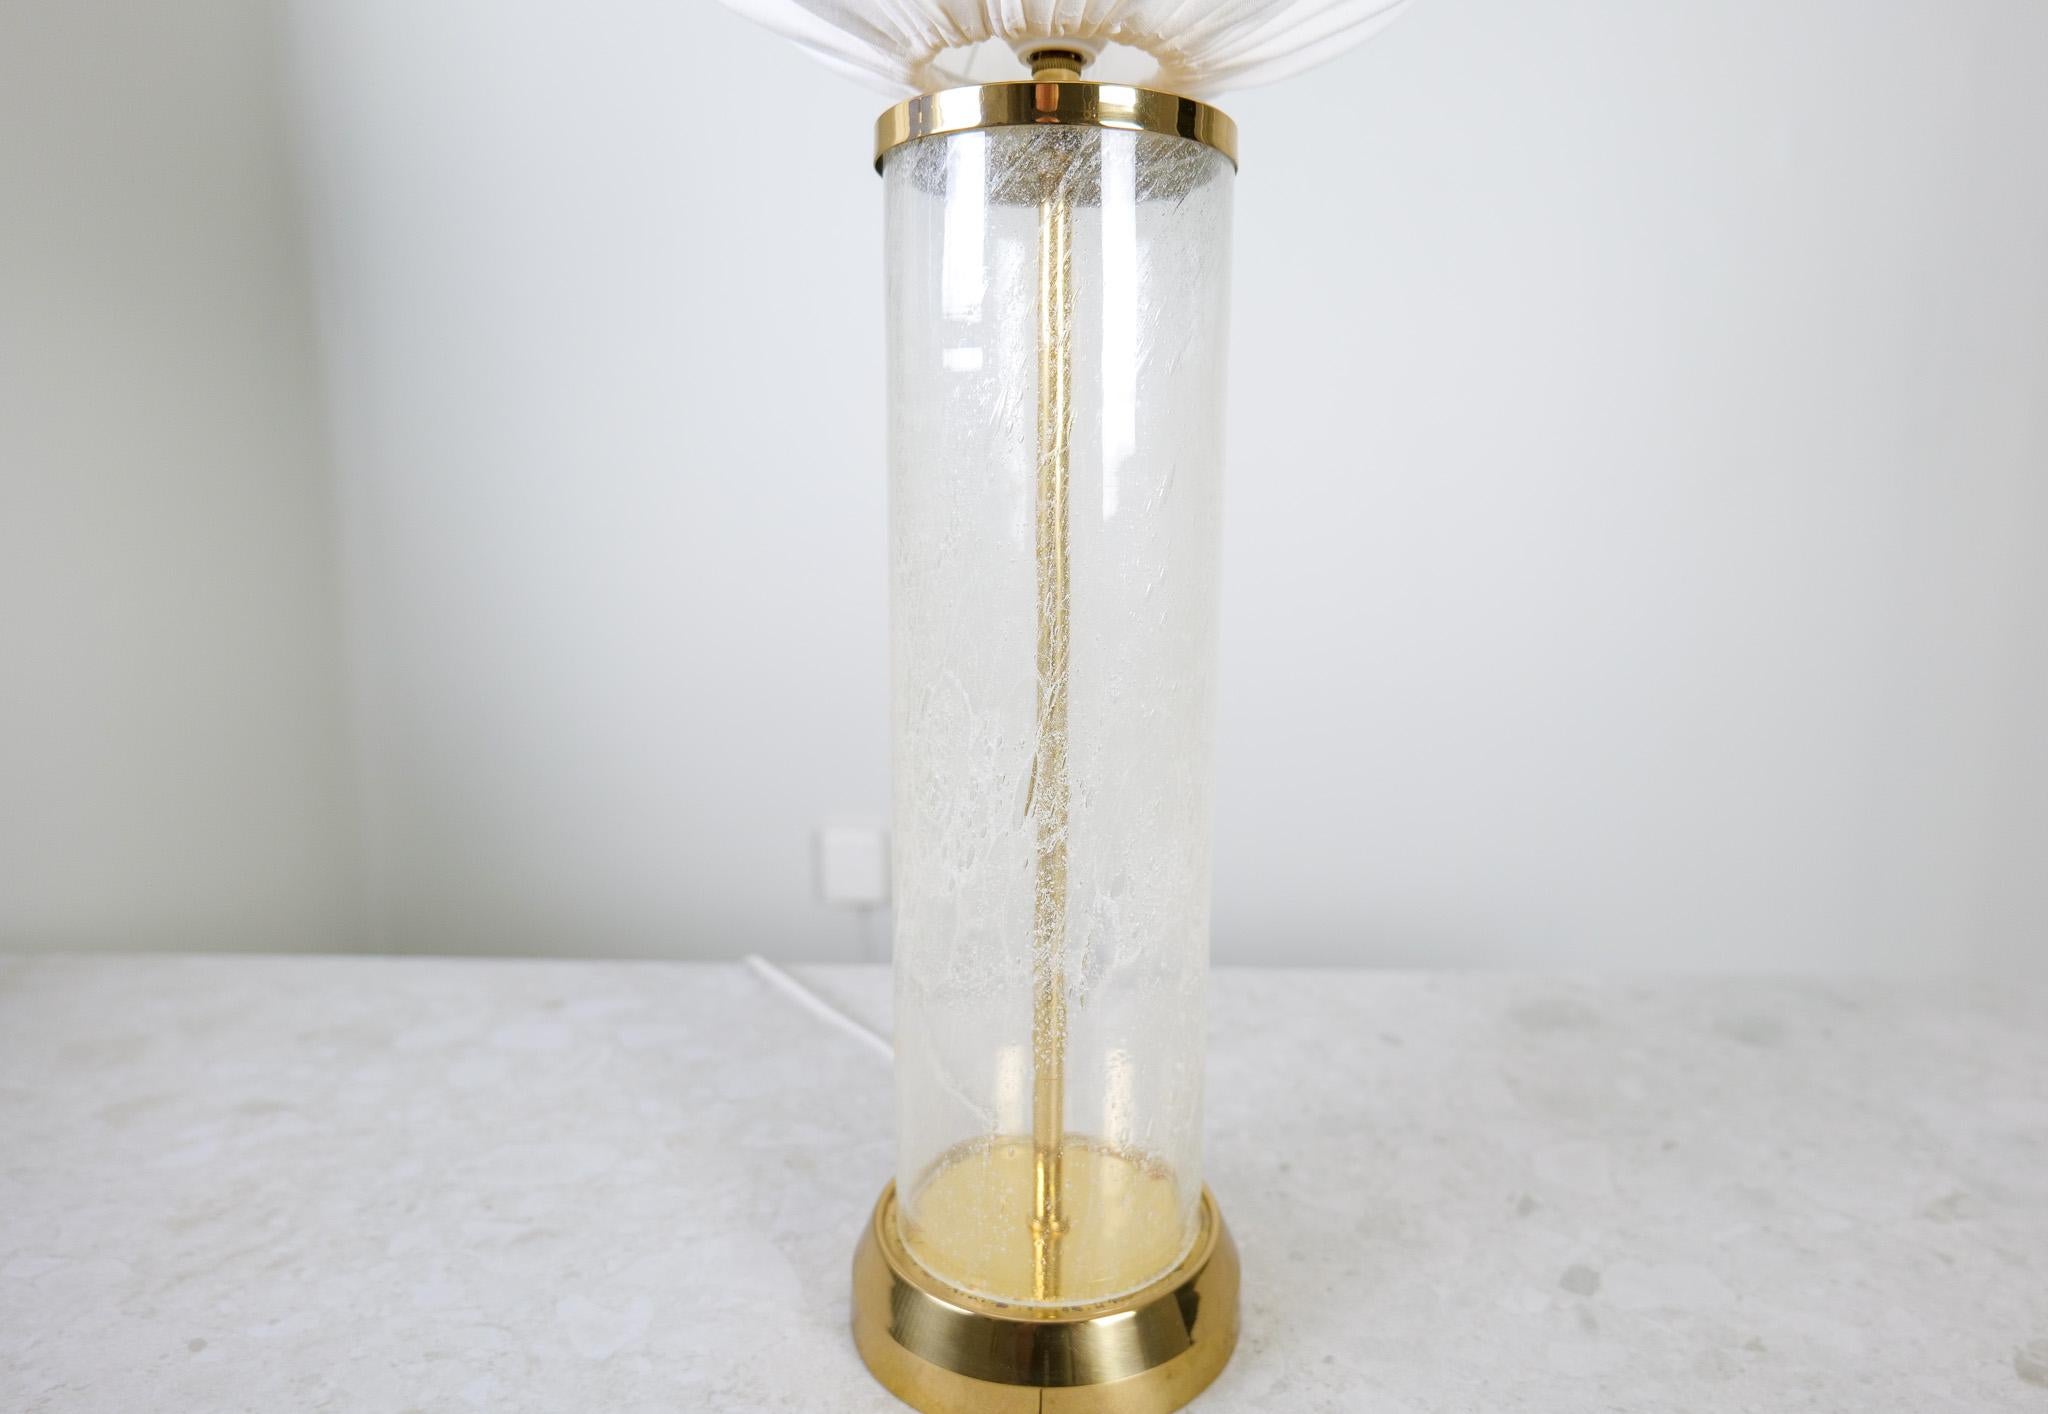 Midcentury Modern Glass and Brass Table Lamp Bergbom B-019 Sweden 1960s For Sale 1